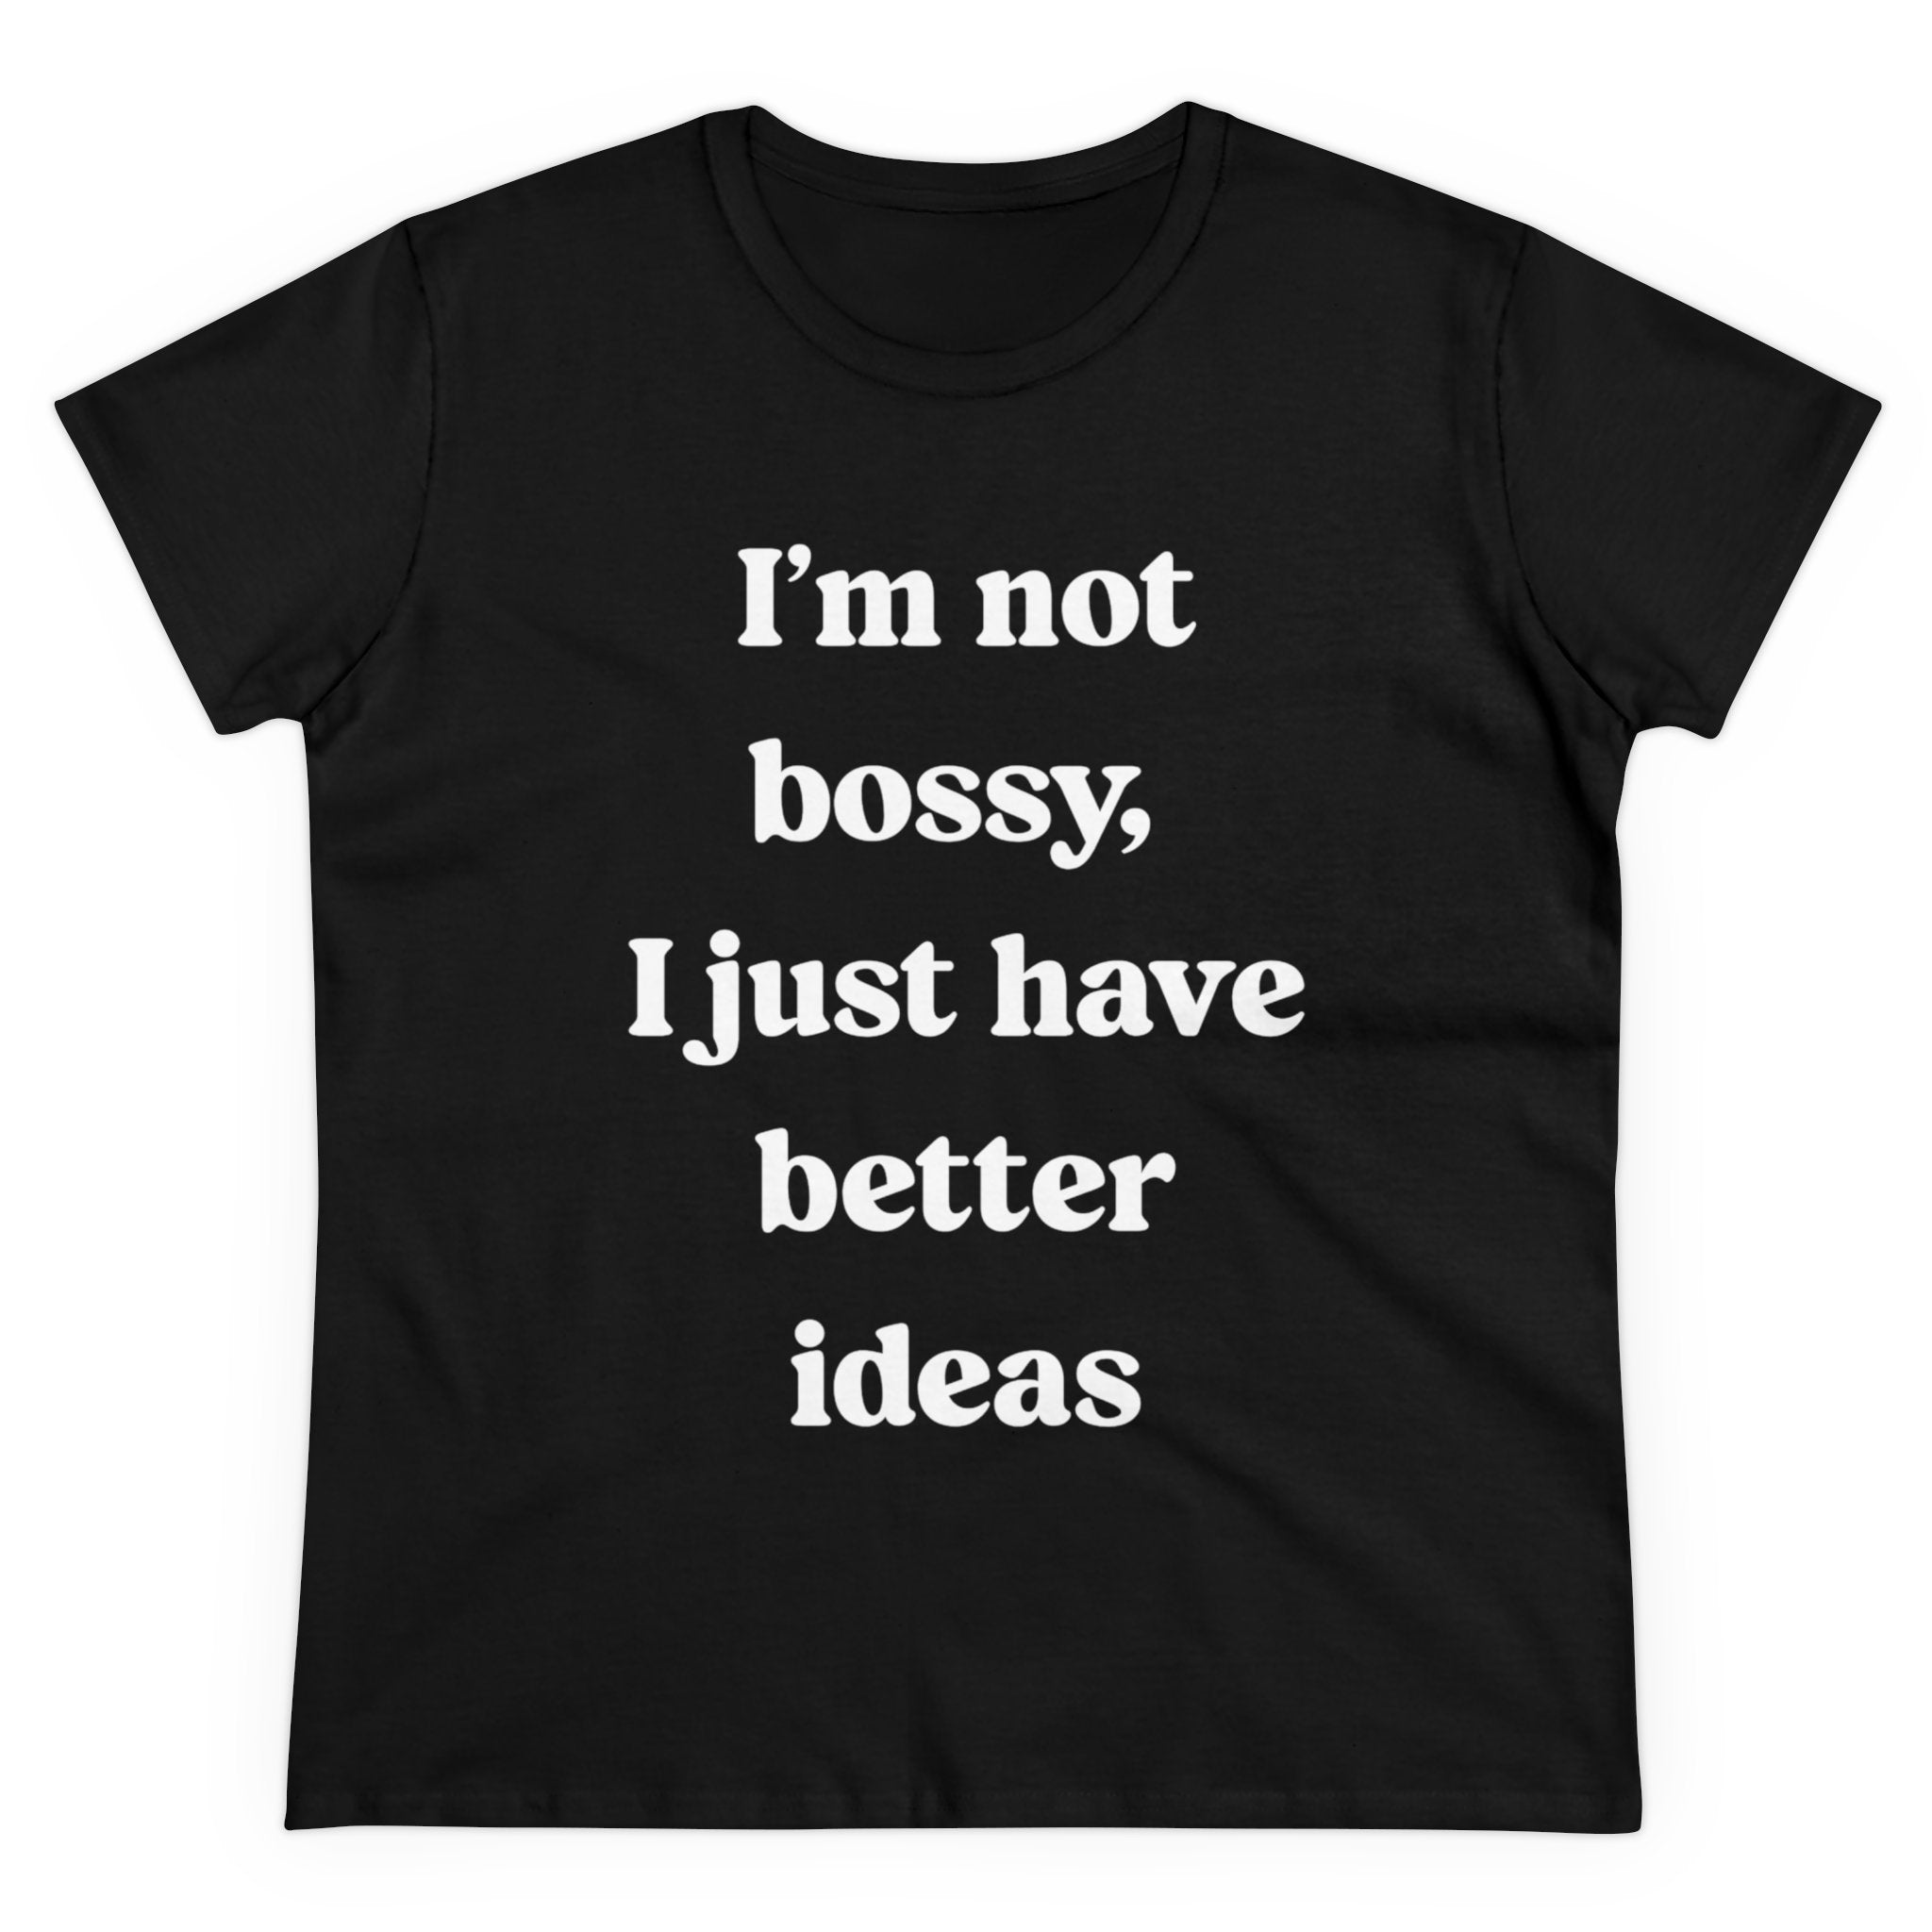 I'm Not Bossy I Just Have Better Ideas - Women's Tee